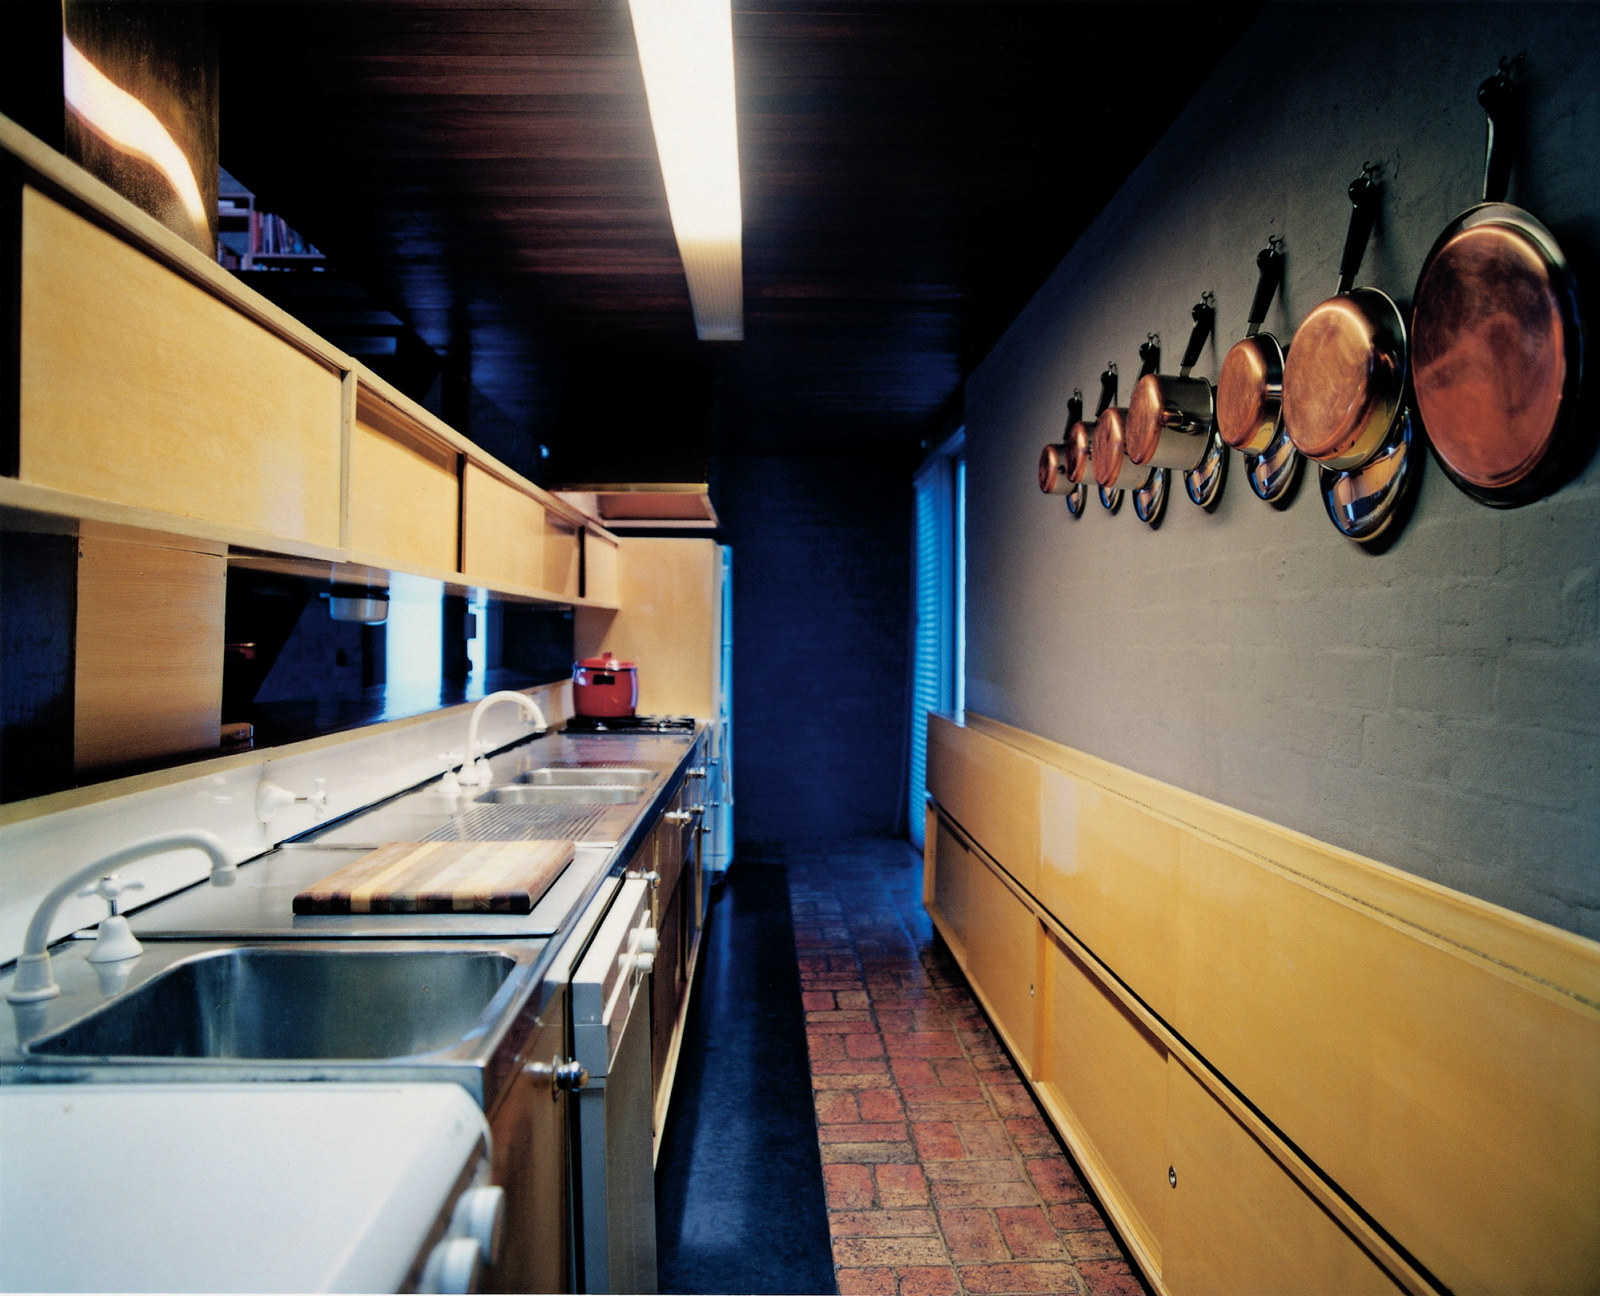 This is a colour photograph of a galley-style kitchen with dark blue walls, timber panelled cupboards, and kitchen pots hanging along one wall